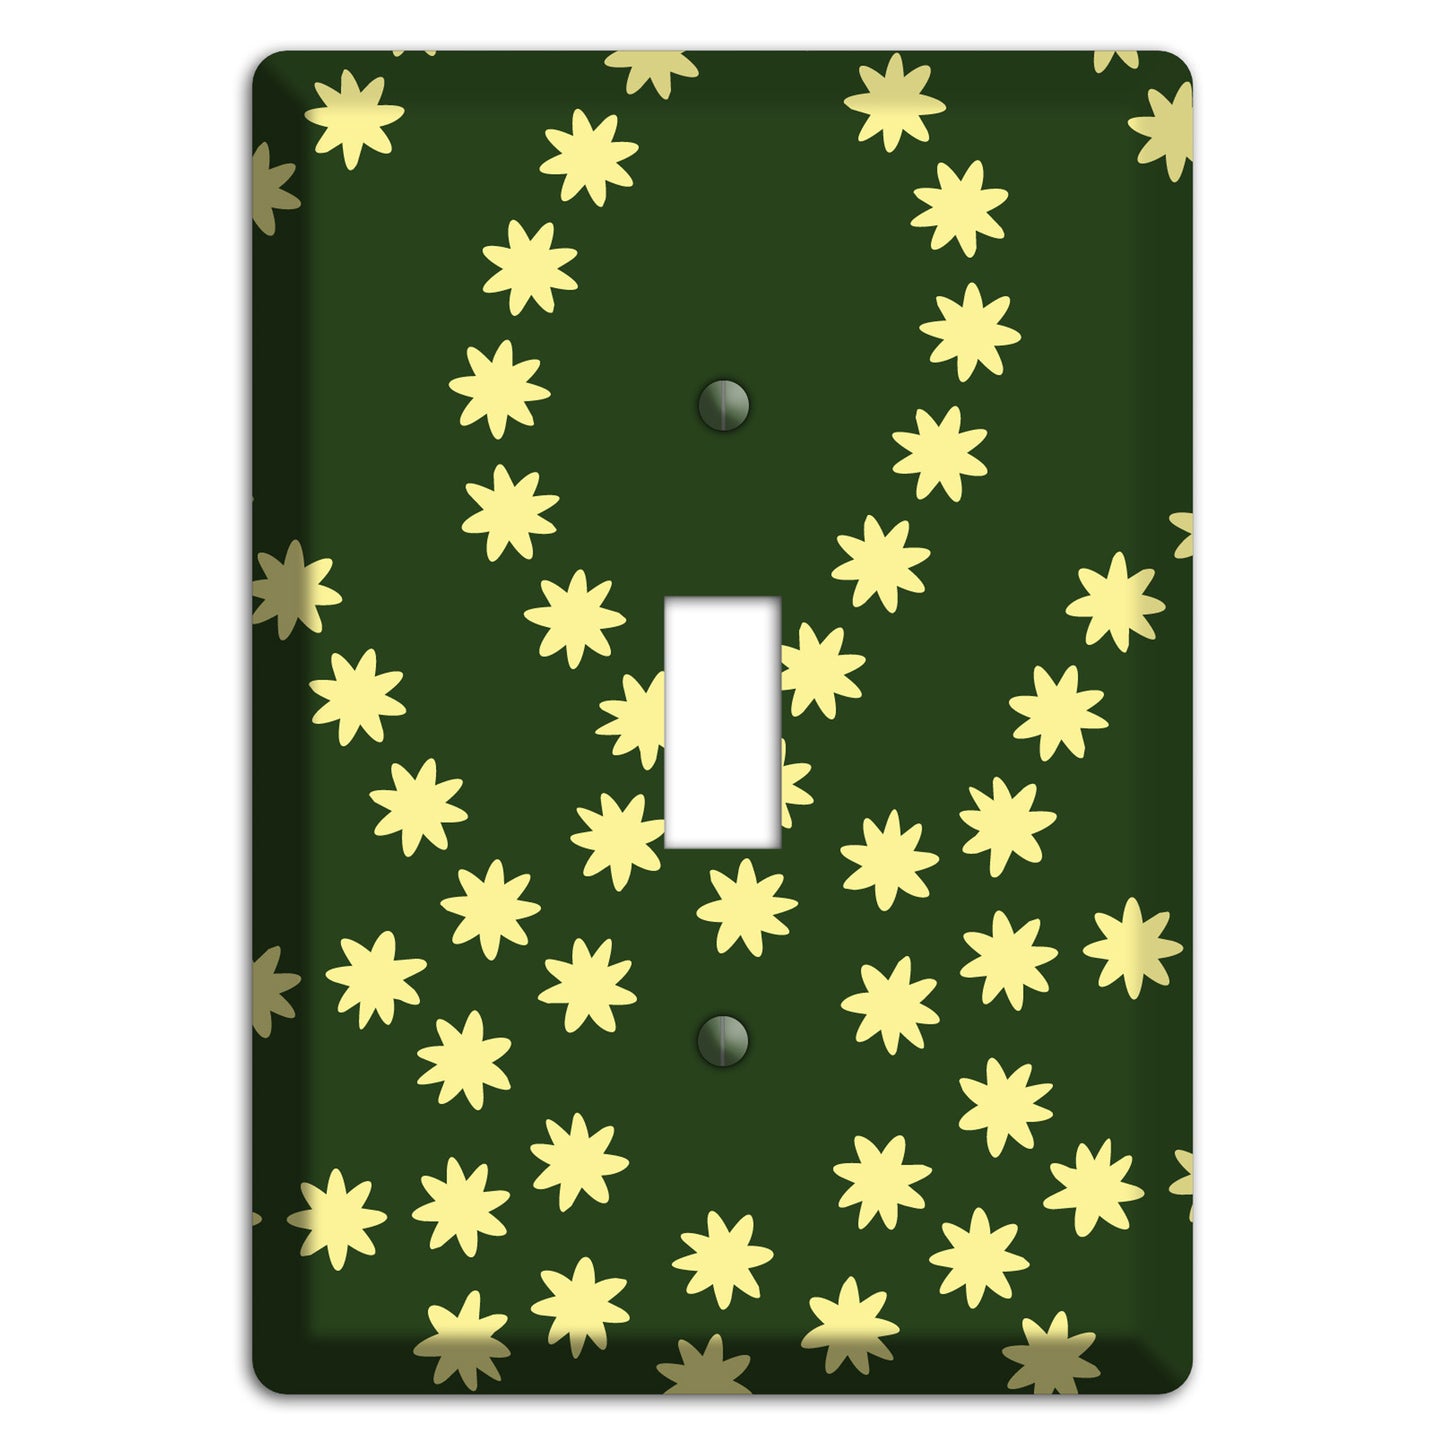 Green with Yellow Constellation Cover Plates